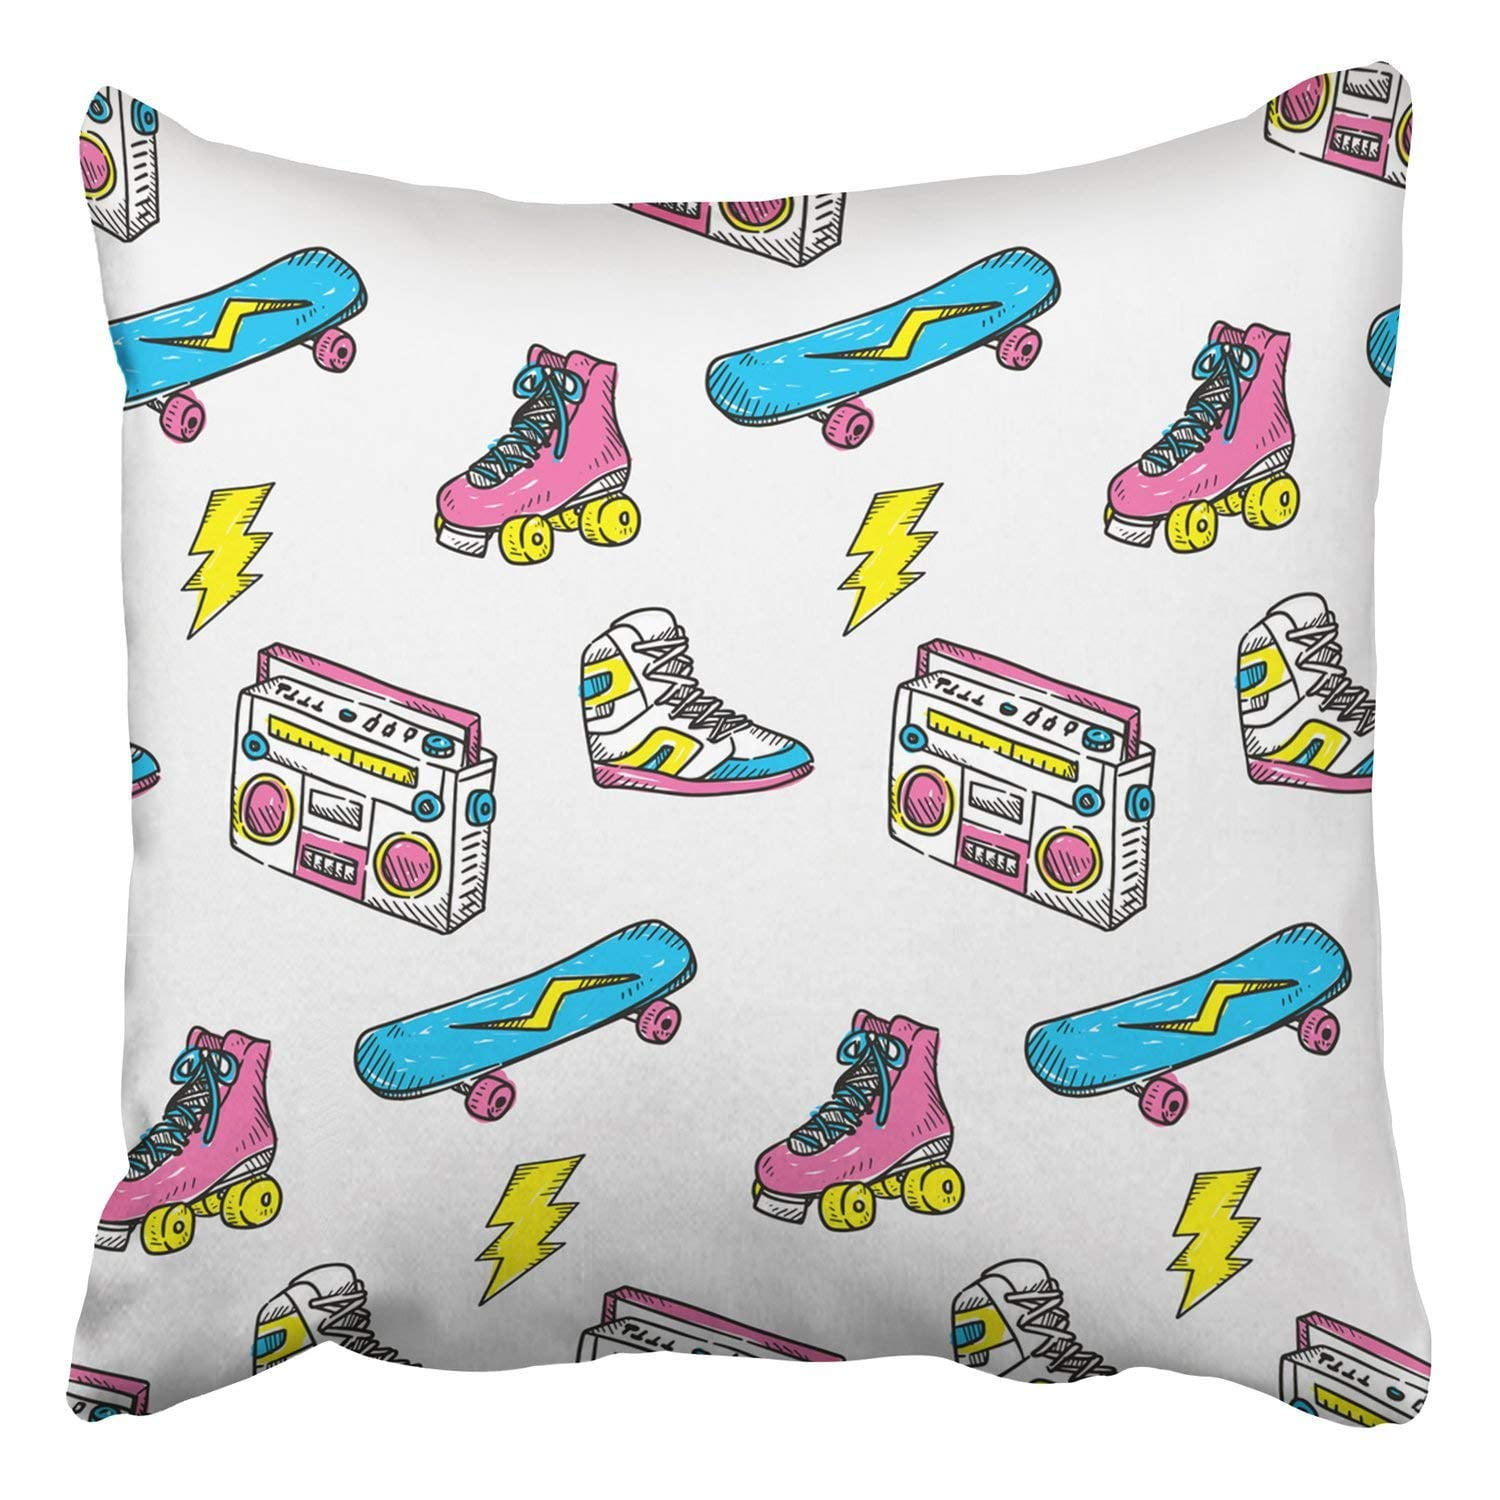 Multicolor Roller Skating Gifts & Accessories Skating Skates-70s Roller Skater Girl Throw Pillow 18x18